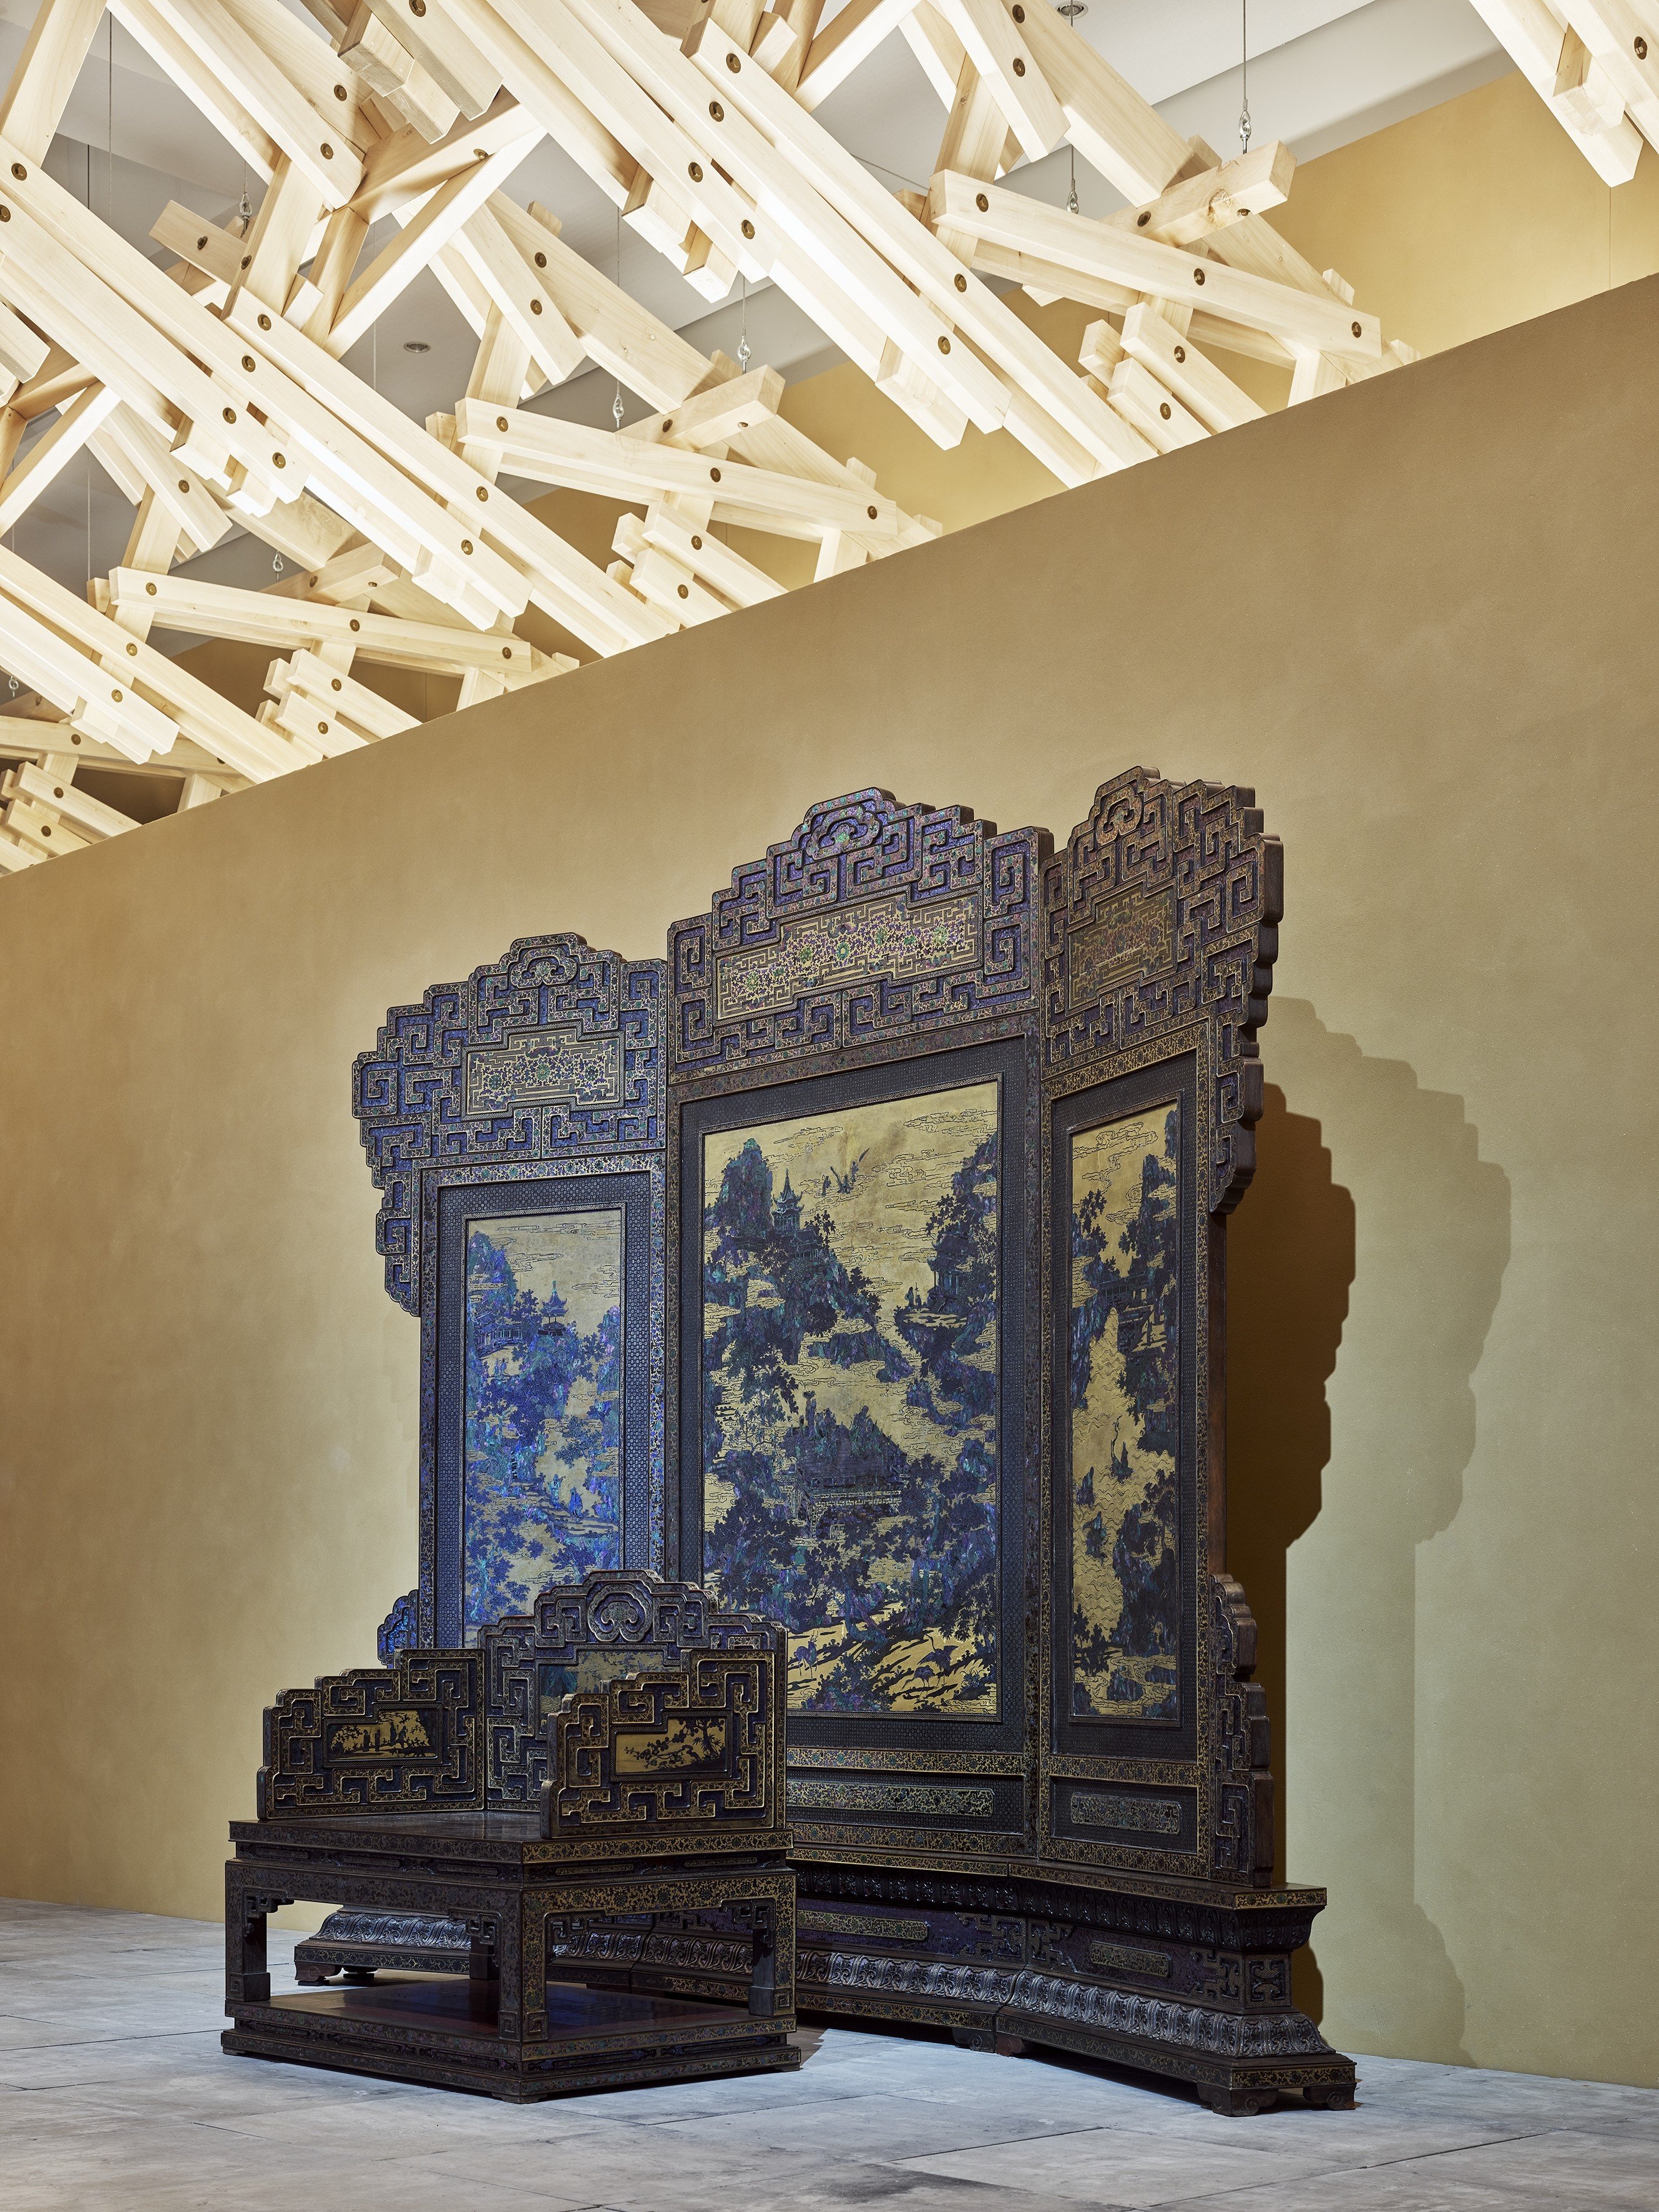 An imperial throne in the Wang Shu Room, at the Humboldt Forum, in Berlin, Germany. Photo: David von Becker